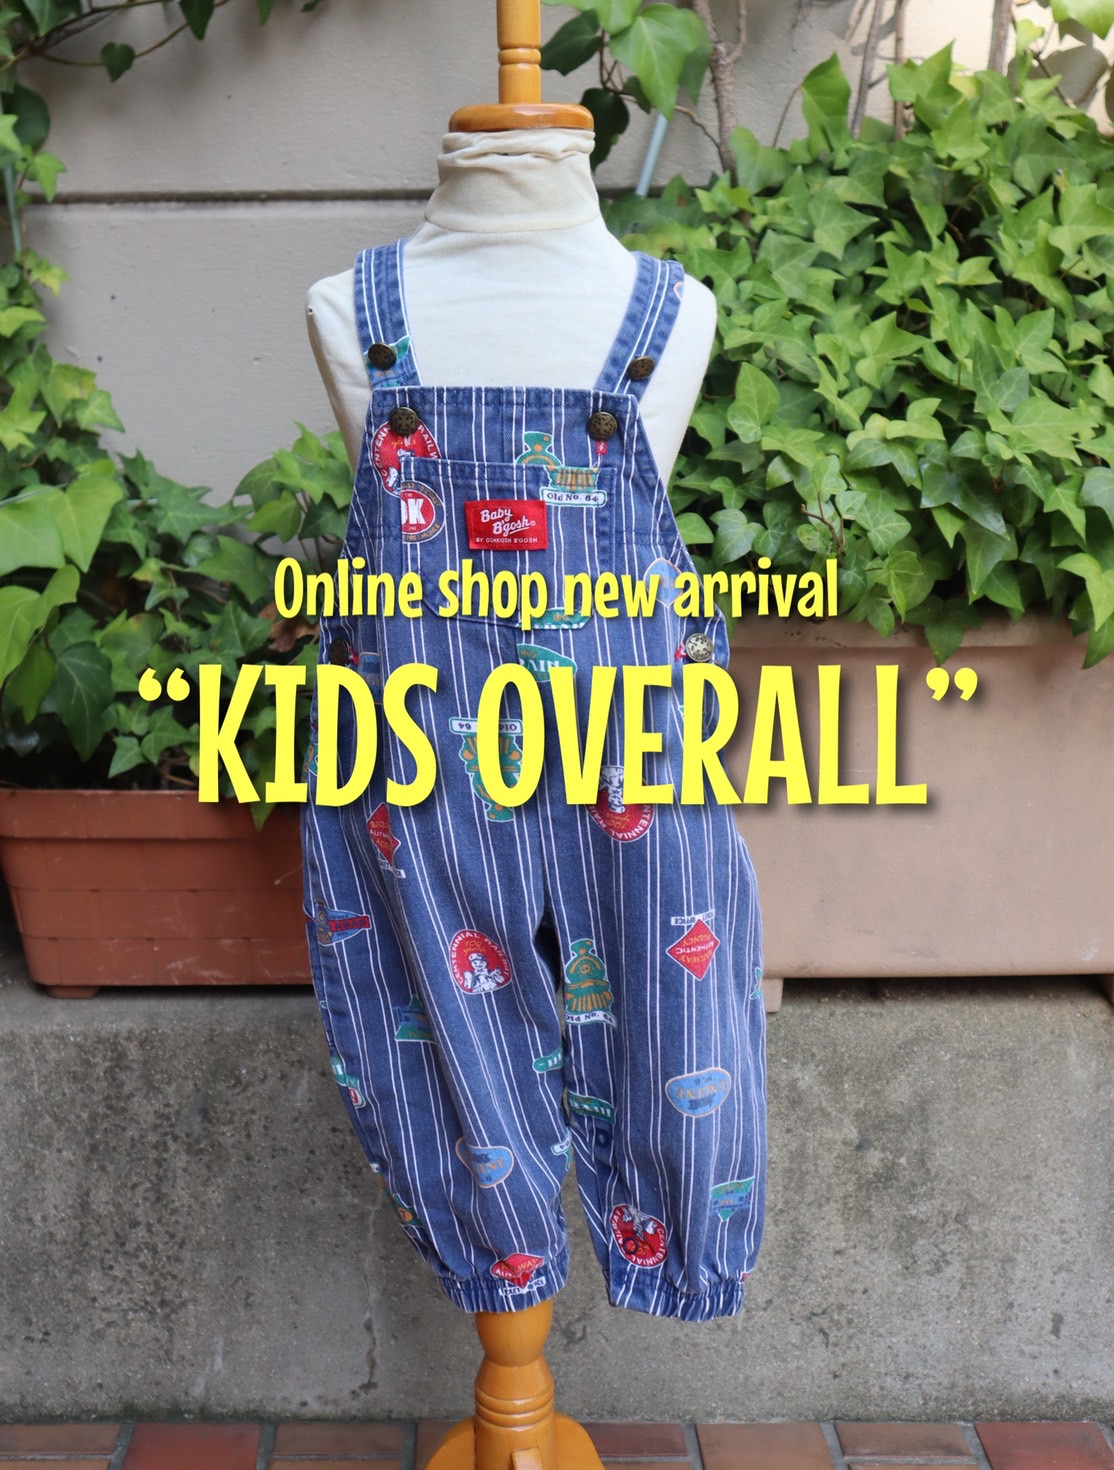 online shop new arrival "KIDS OVERALL"☆